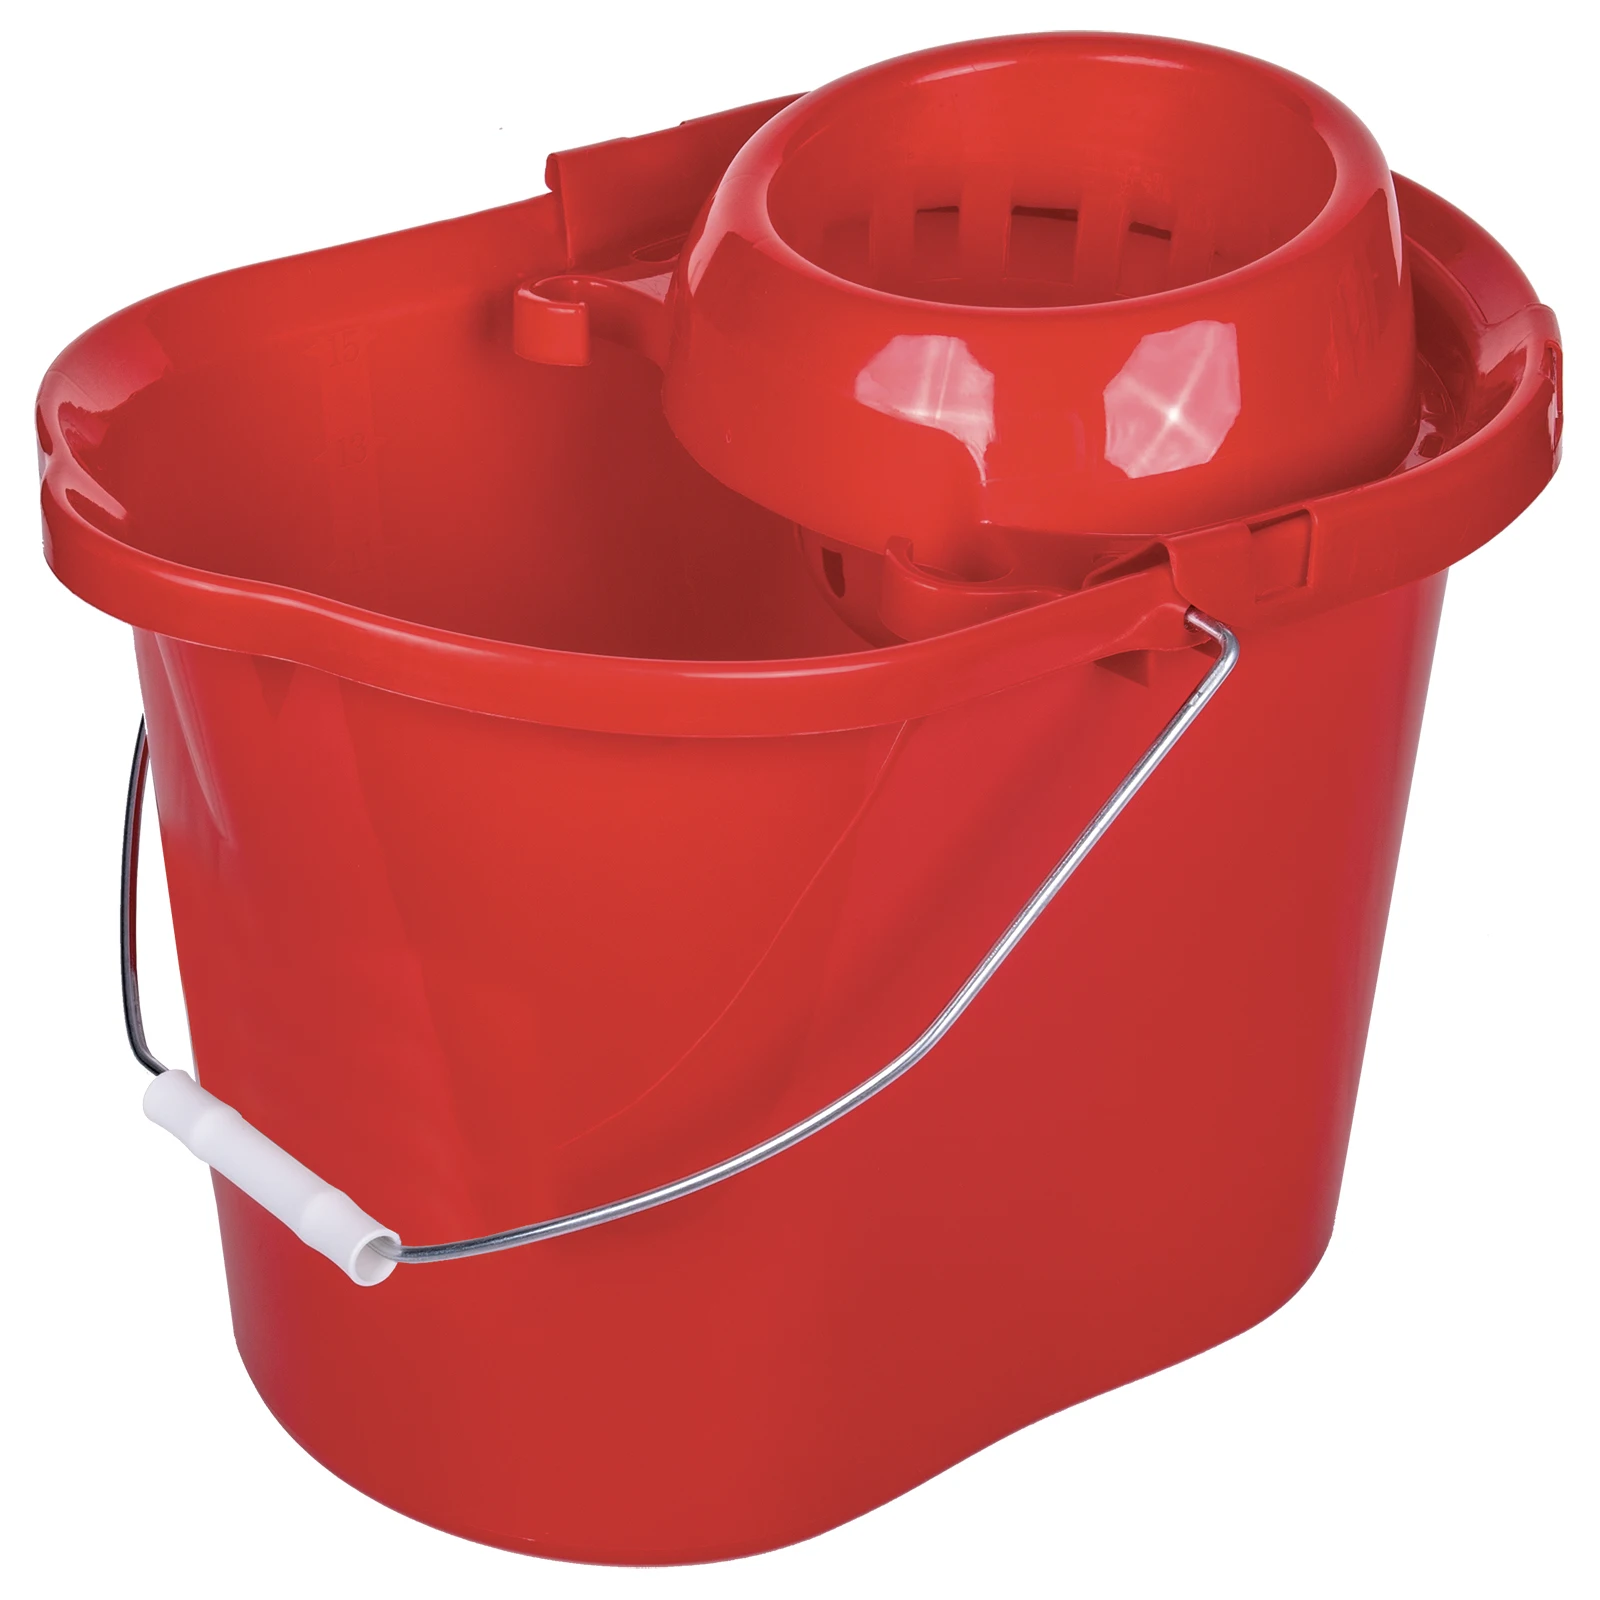 15 Litre Mop Bucket Plastic Red Colour For Cleaning Floor & Tiles Easy Pour Lip 